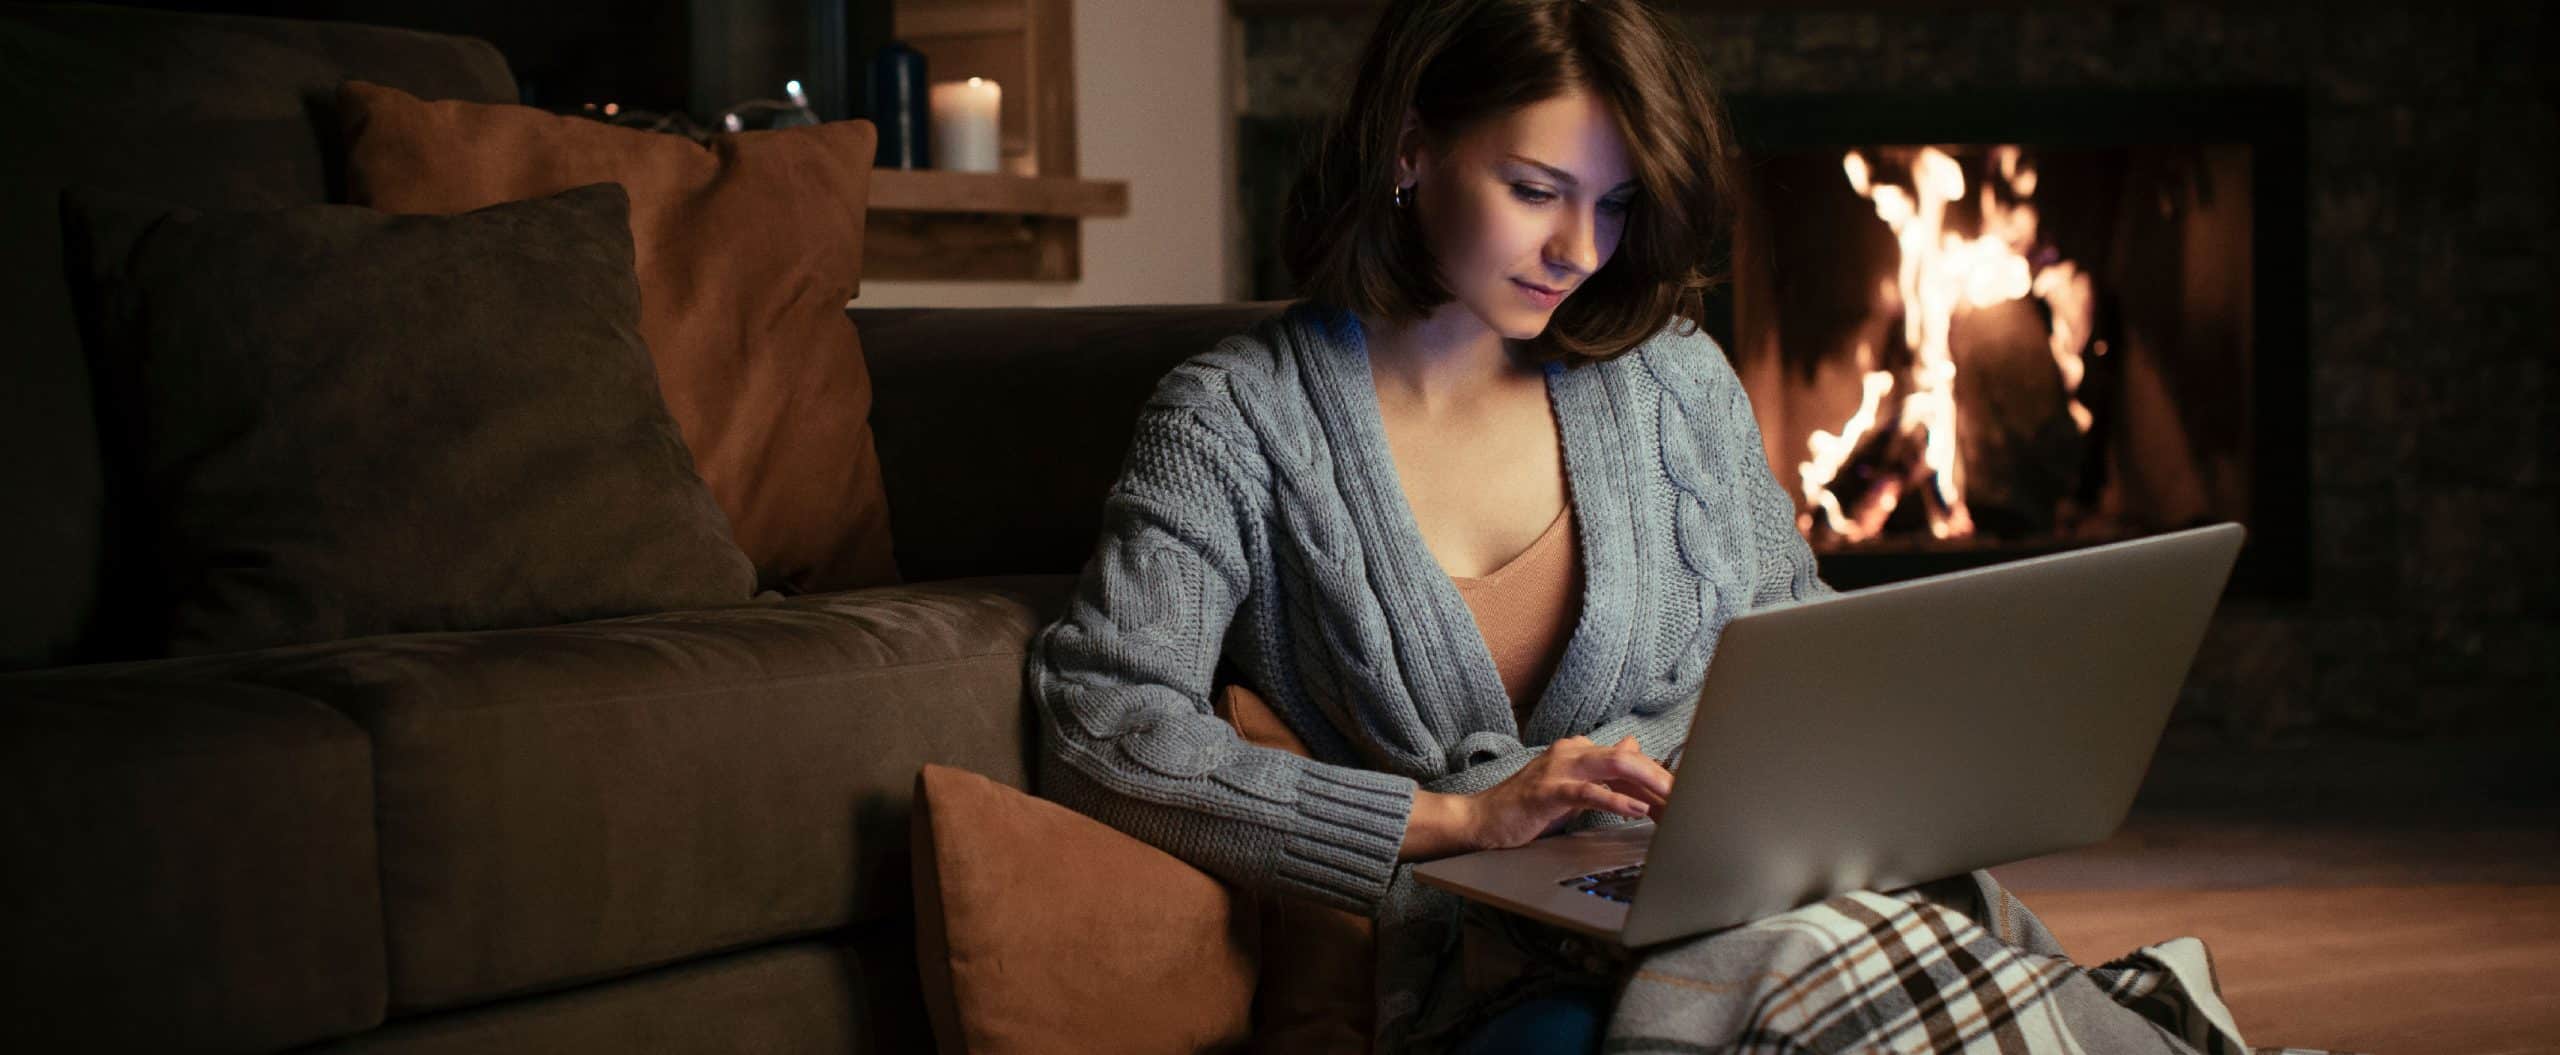 woman on laptop in home with fireplace